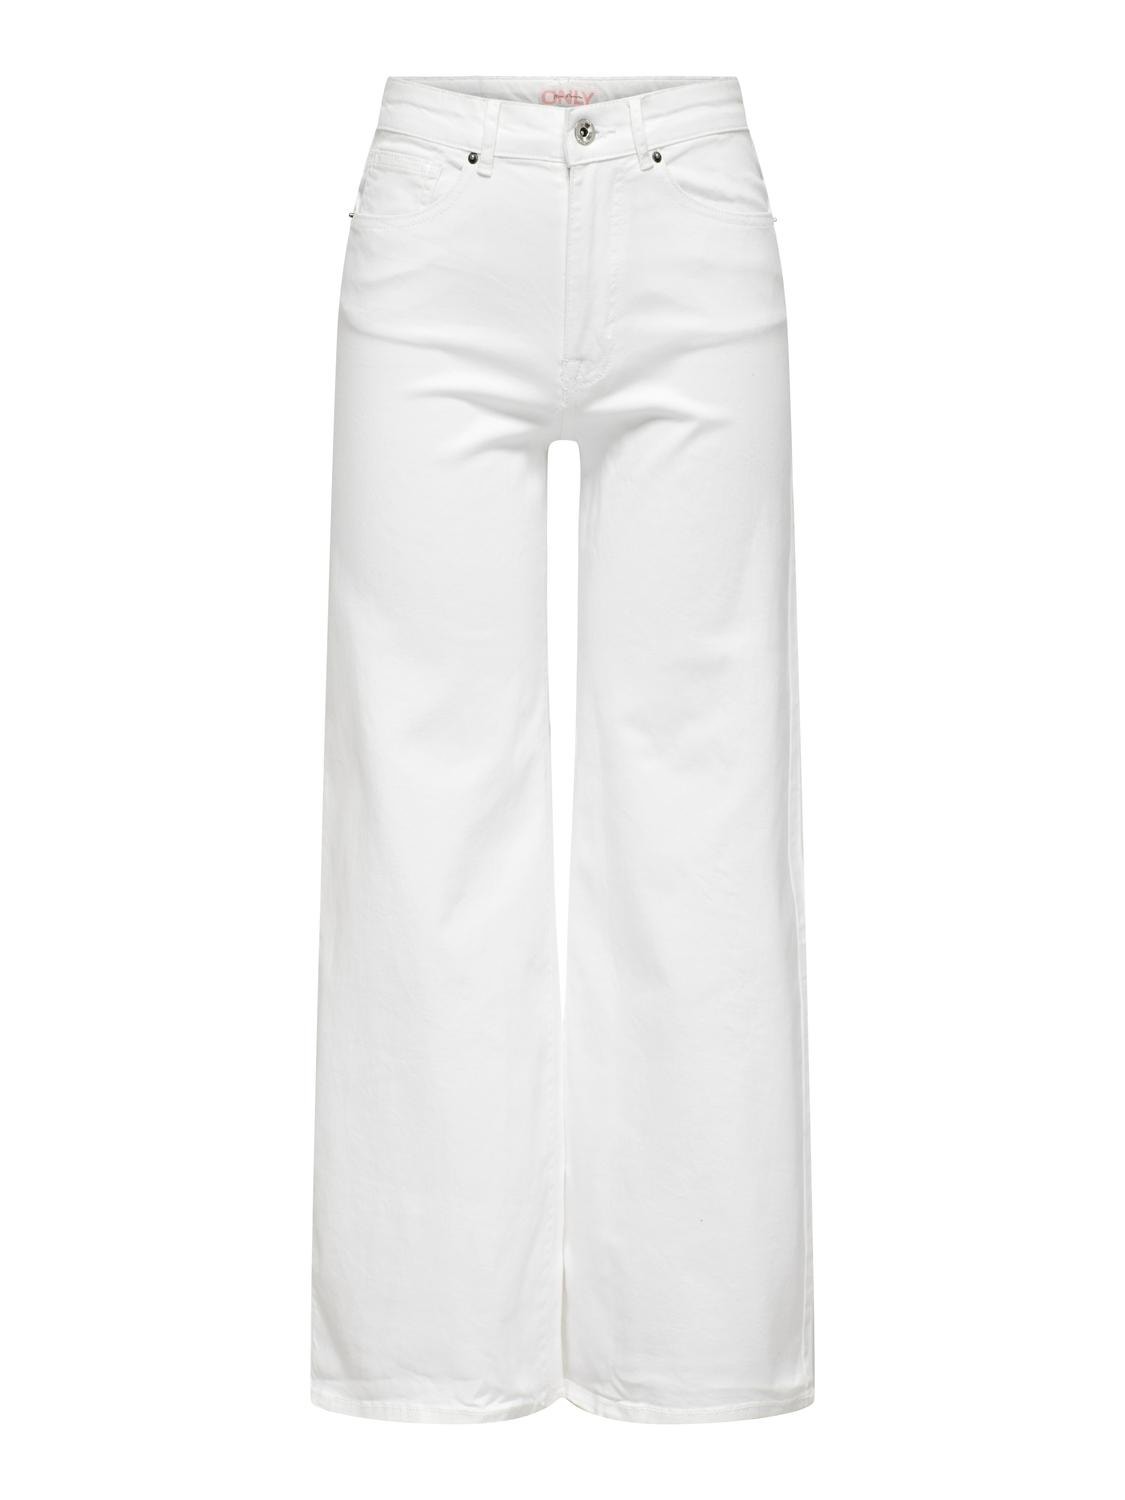 ONLY Normal geschnitten Hohe Taille Hose -White - 15273719